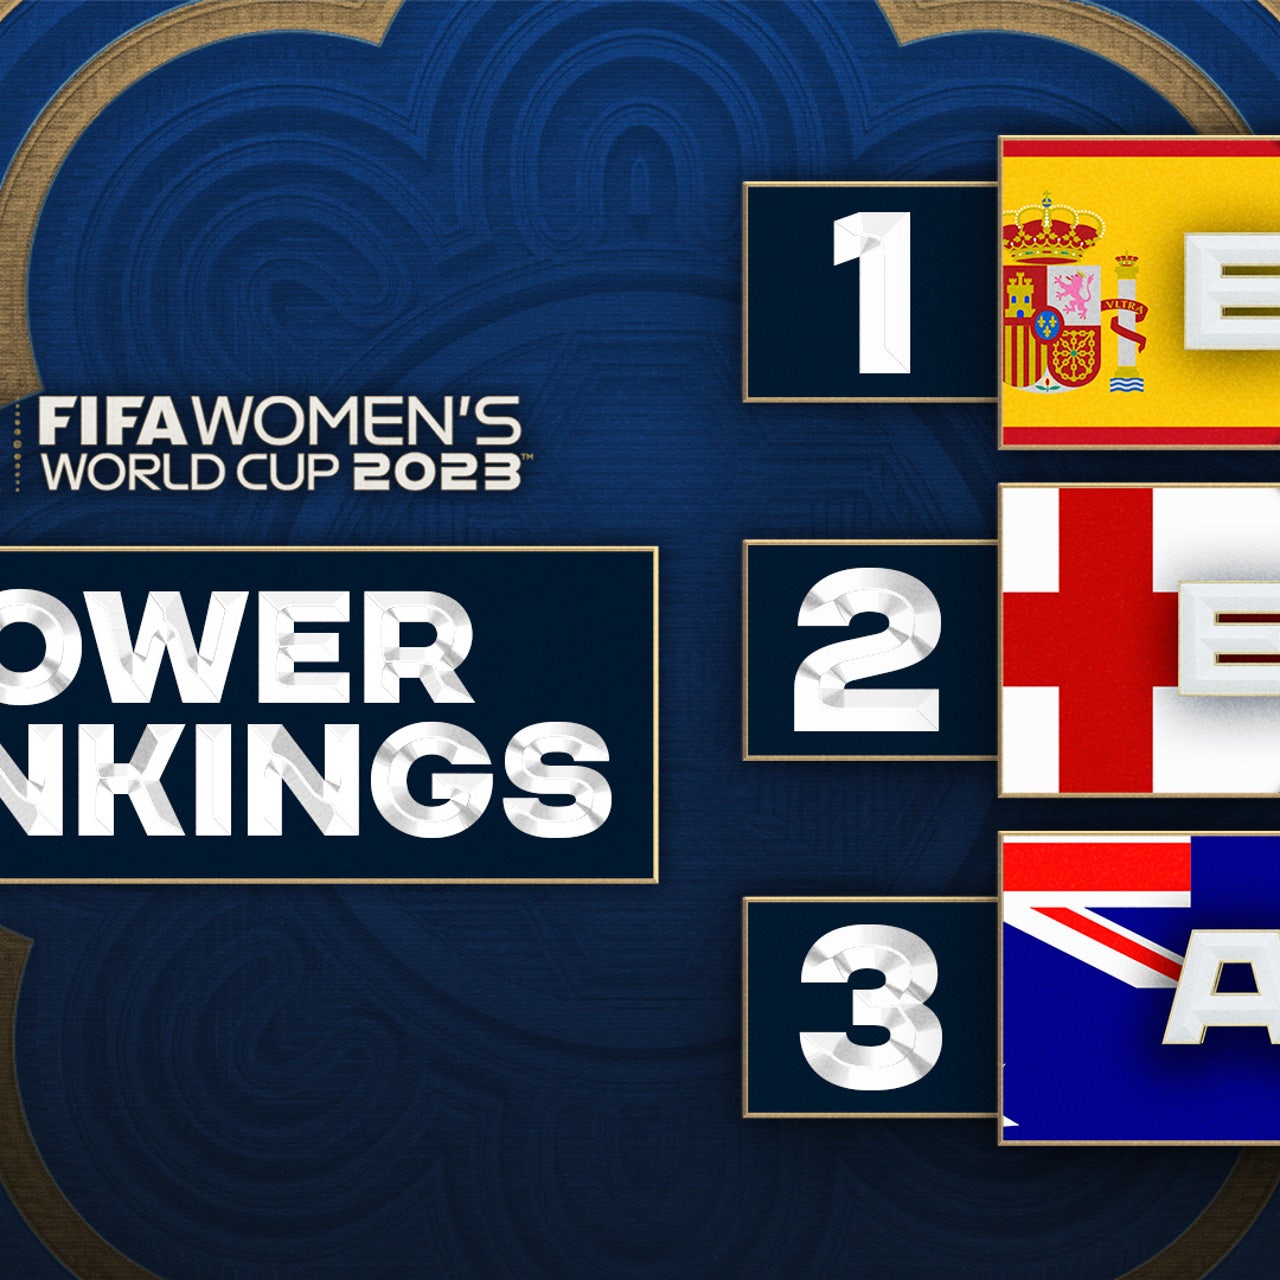 Womens World Cup power rankings England moves up, but Spain stays No